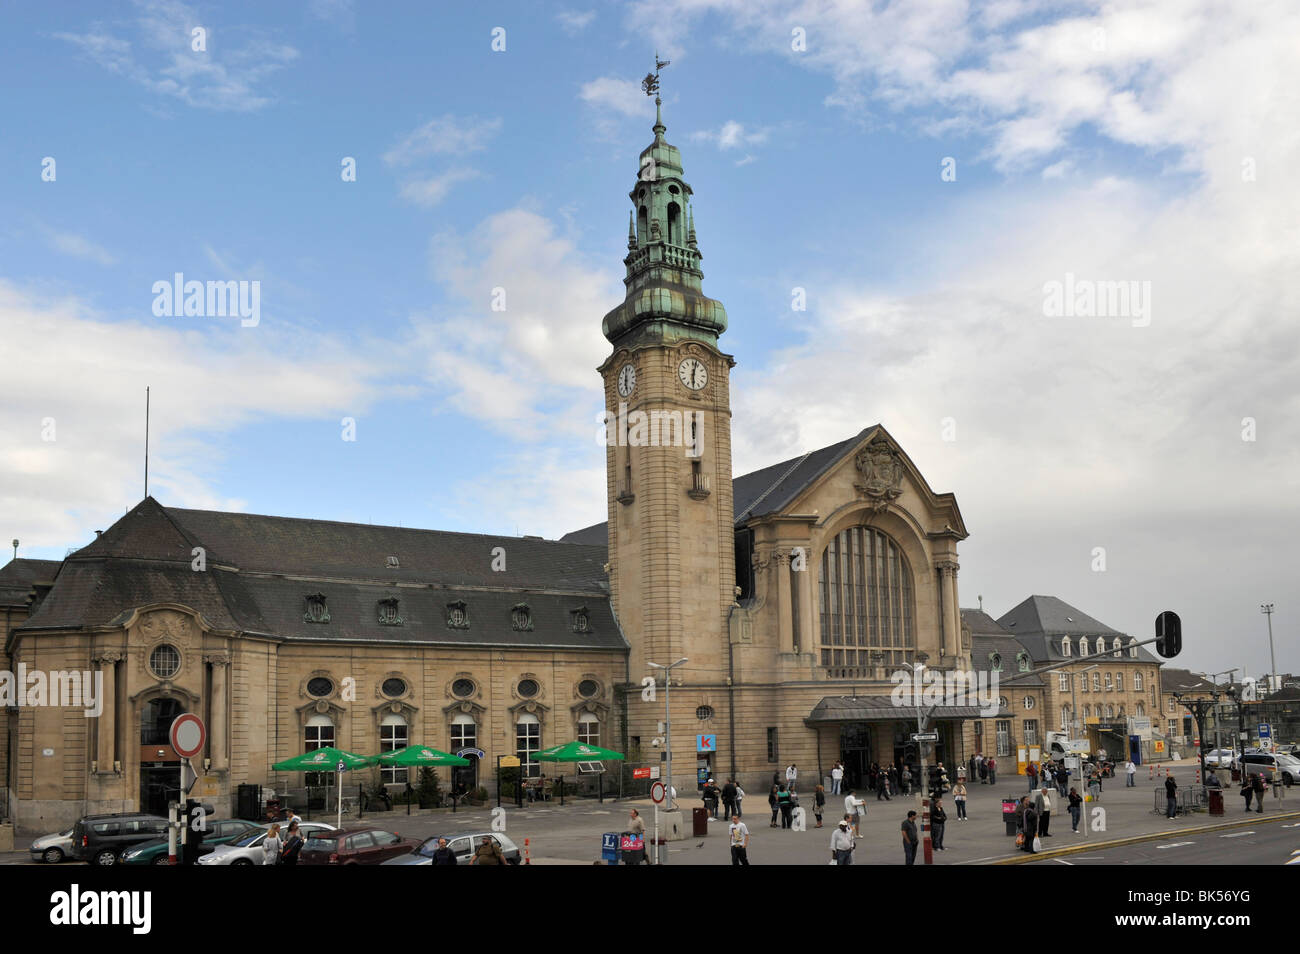 The main railway station - Gare Centrale - City Of Luxembourg, Luxembourg, Europe. Stock Photo